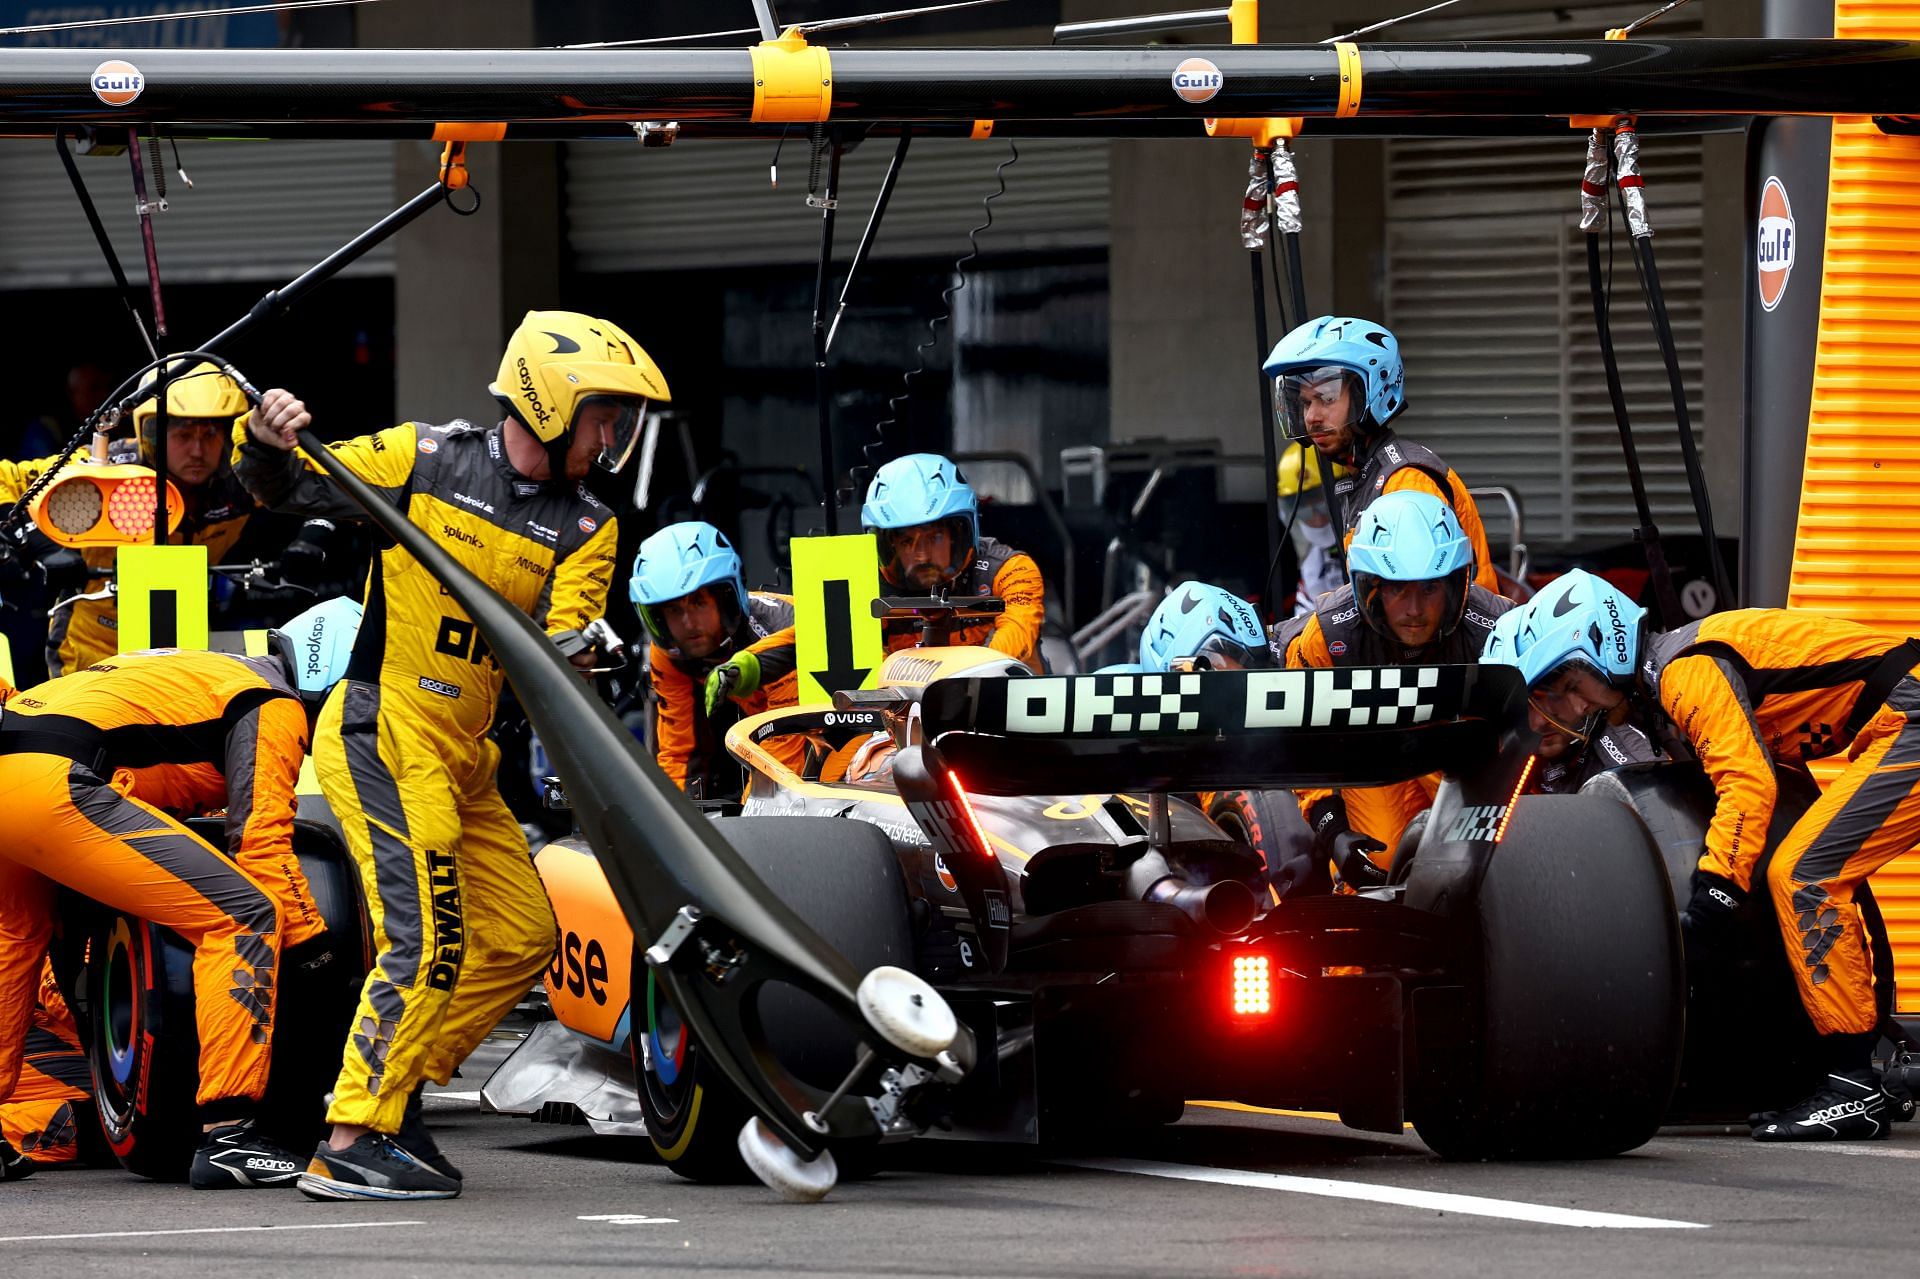 What's the fastest pitstop in F1 history? McLaren's 1.98 seconds